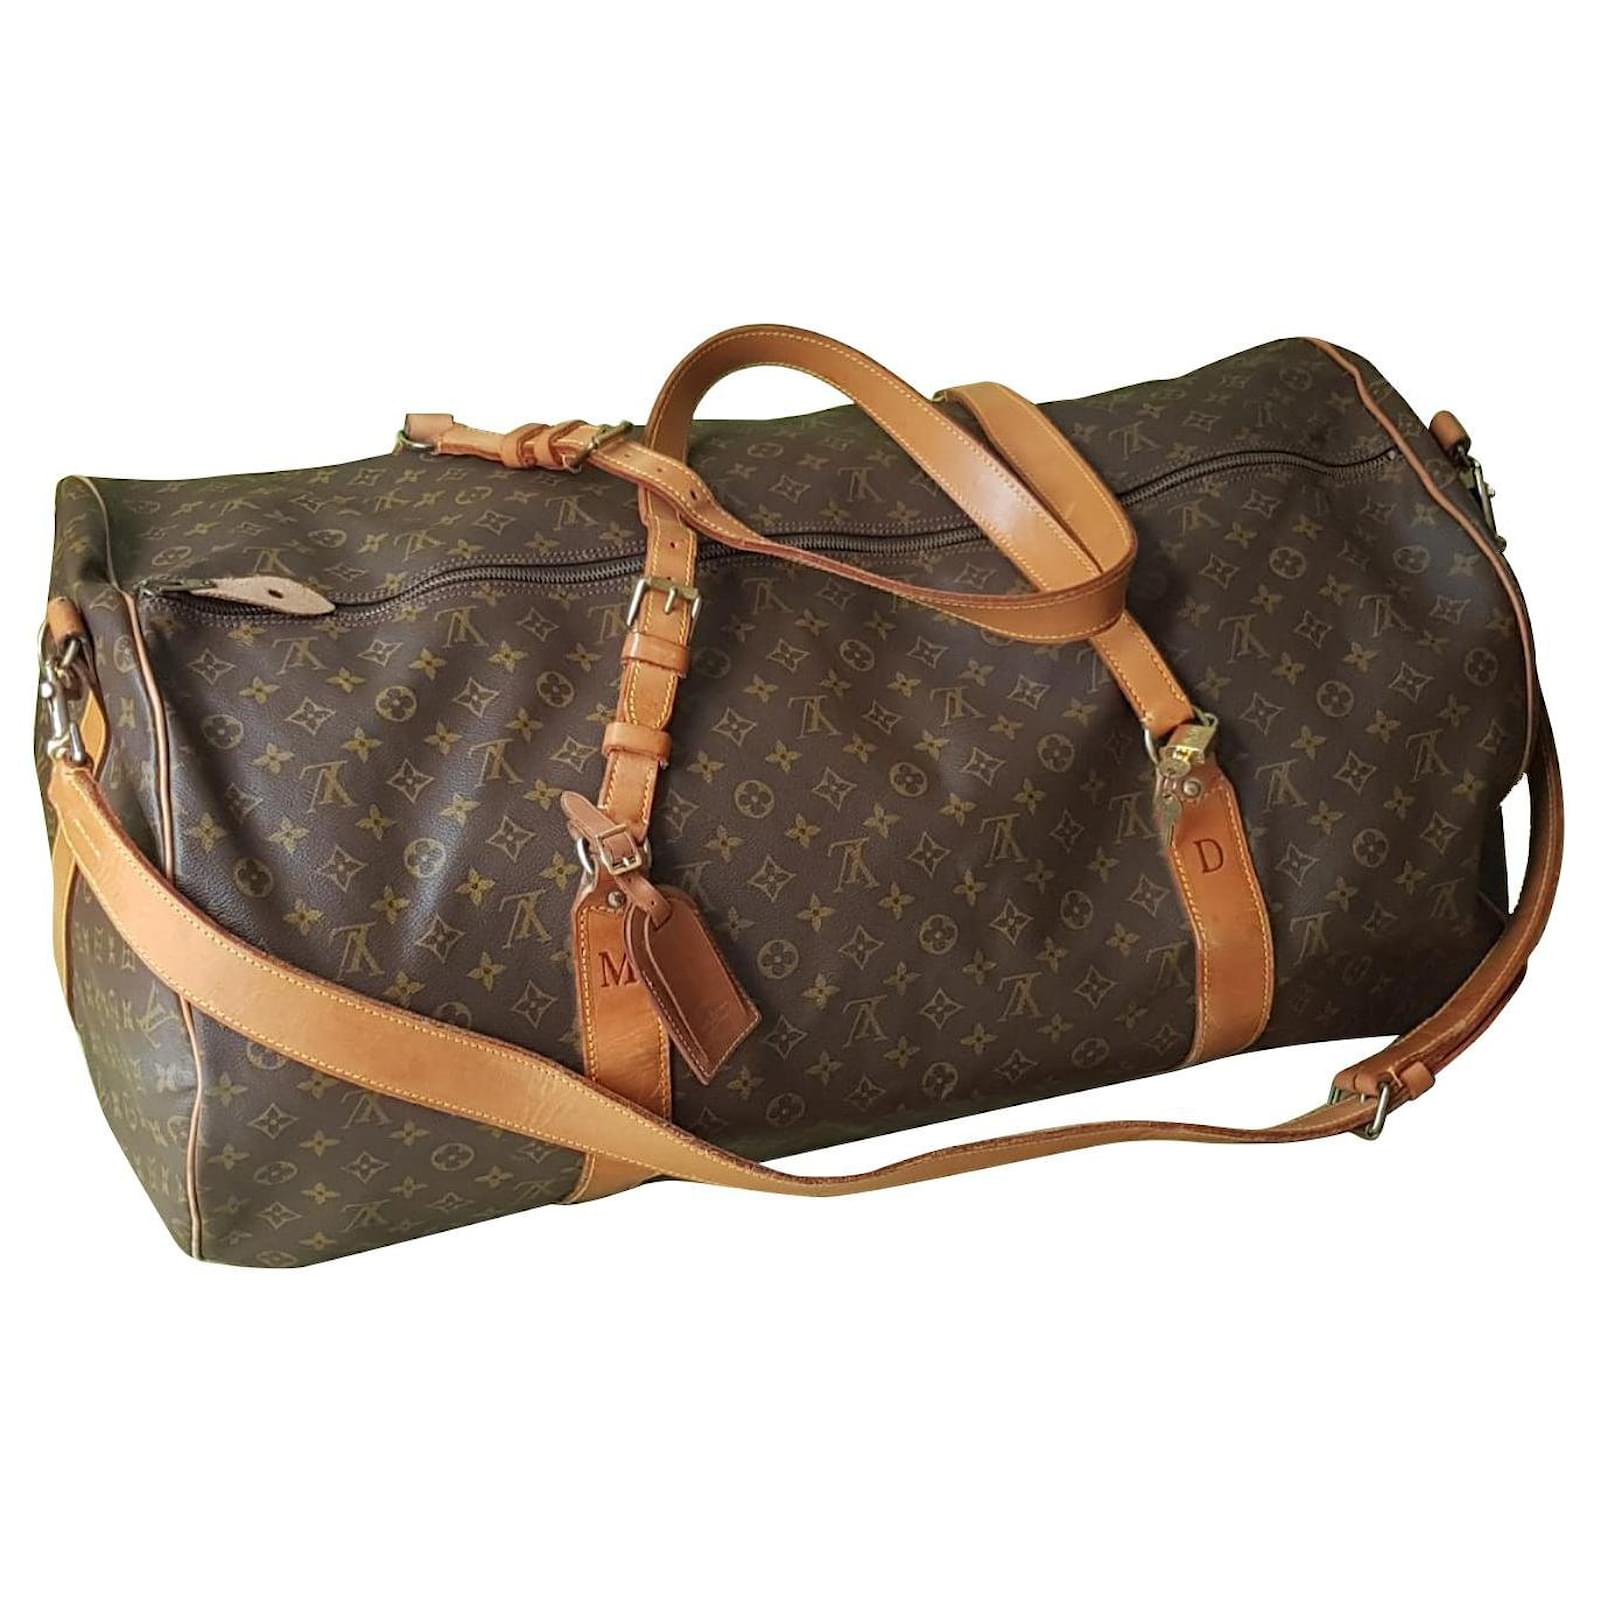 See These Special Louis Vuitton Monogram Pieces